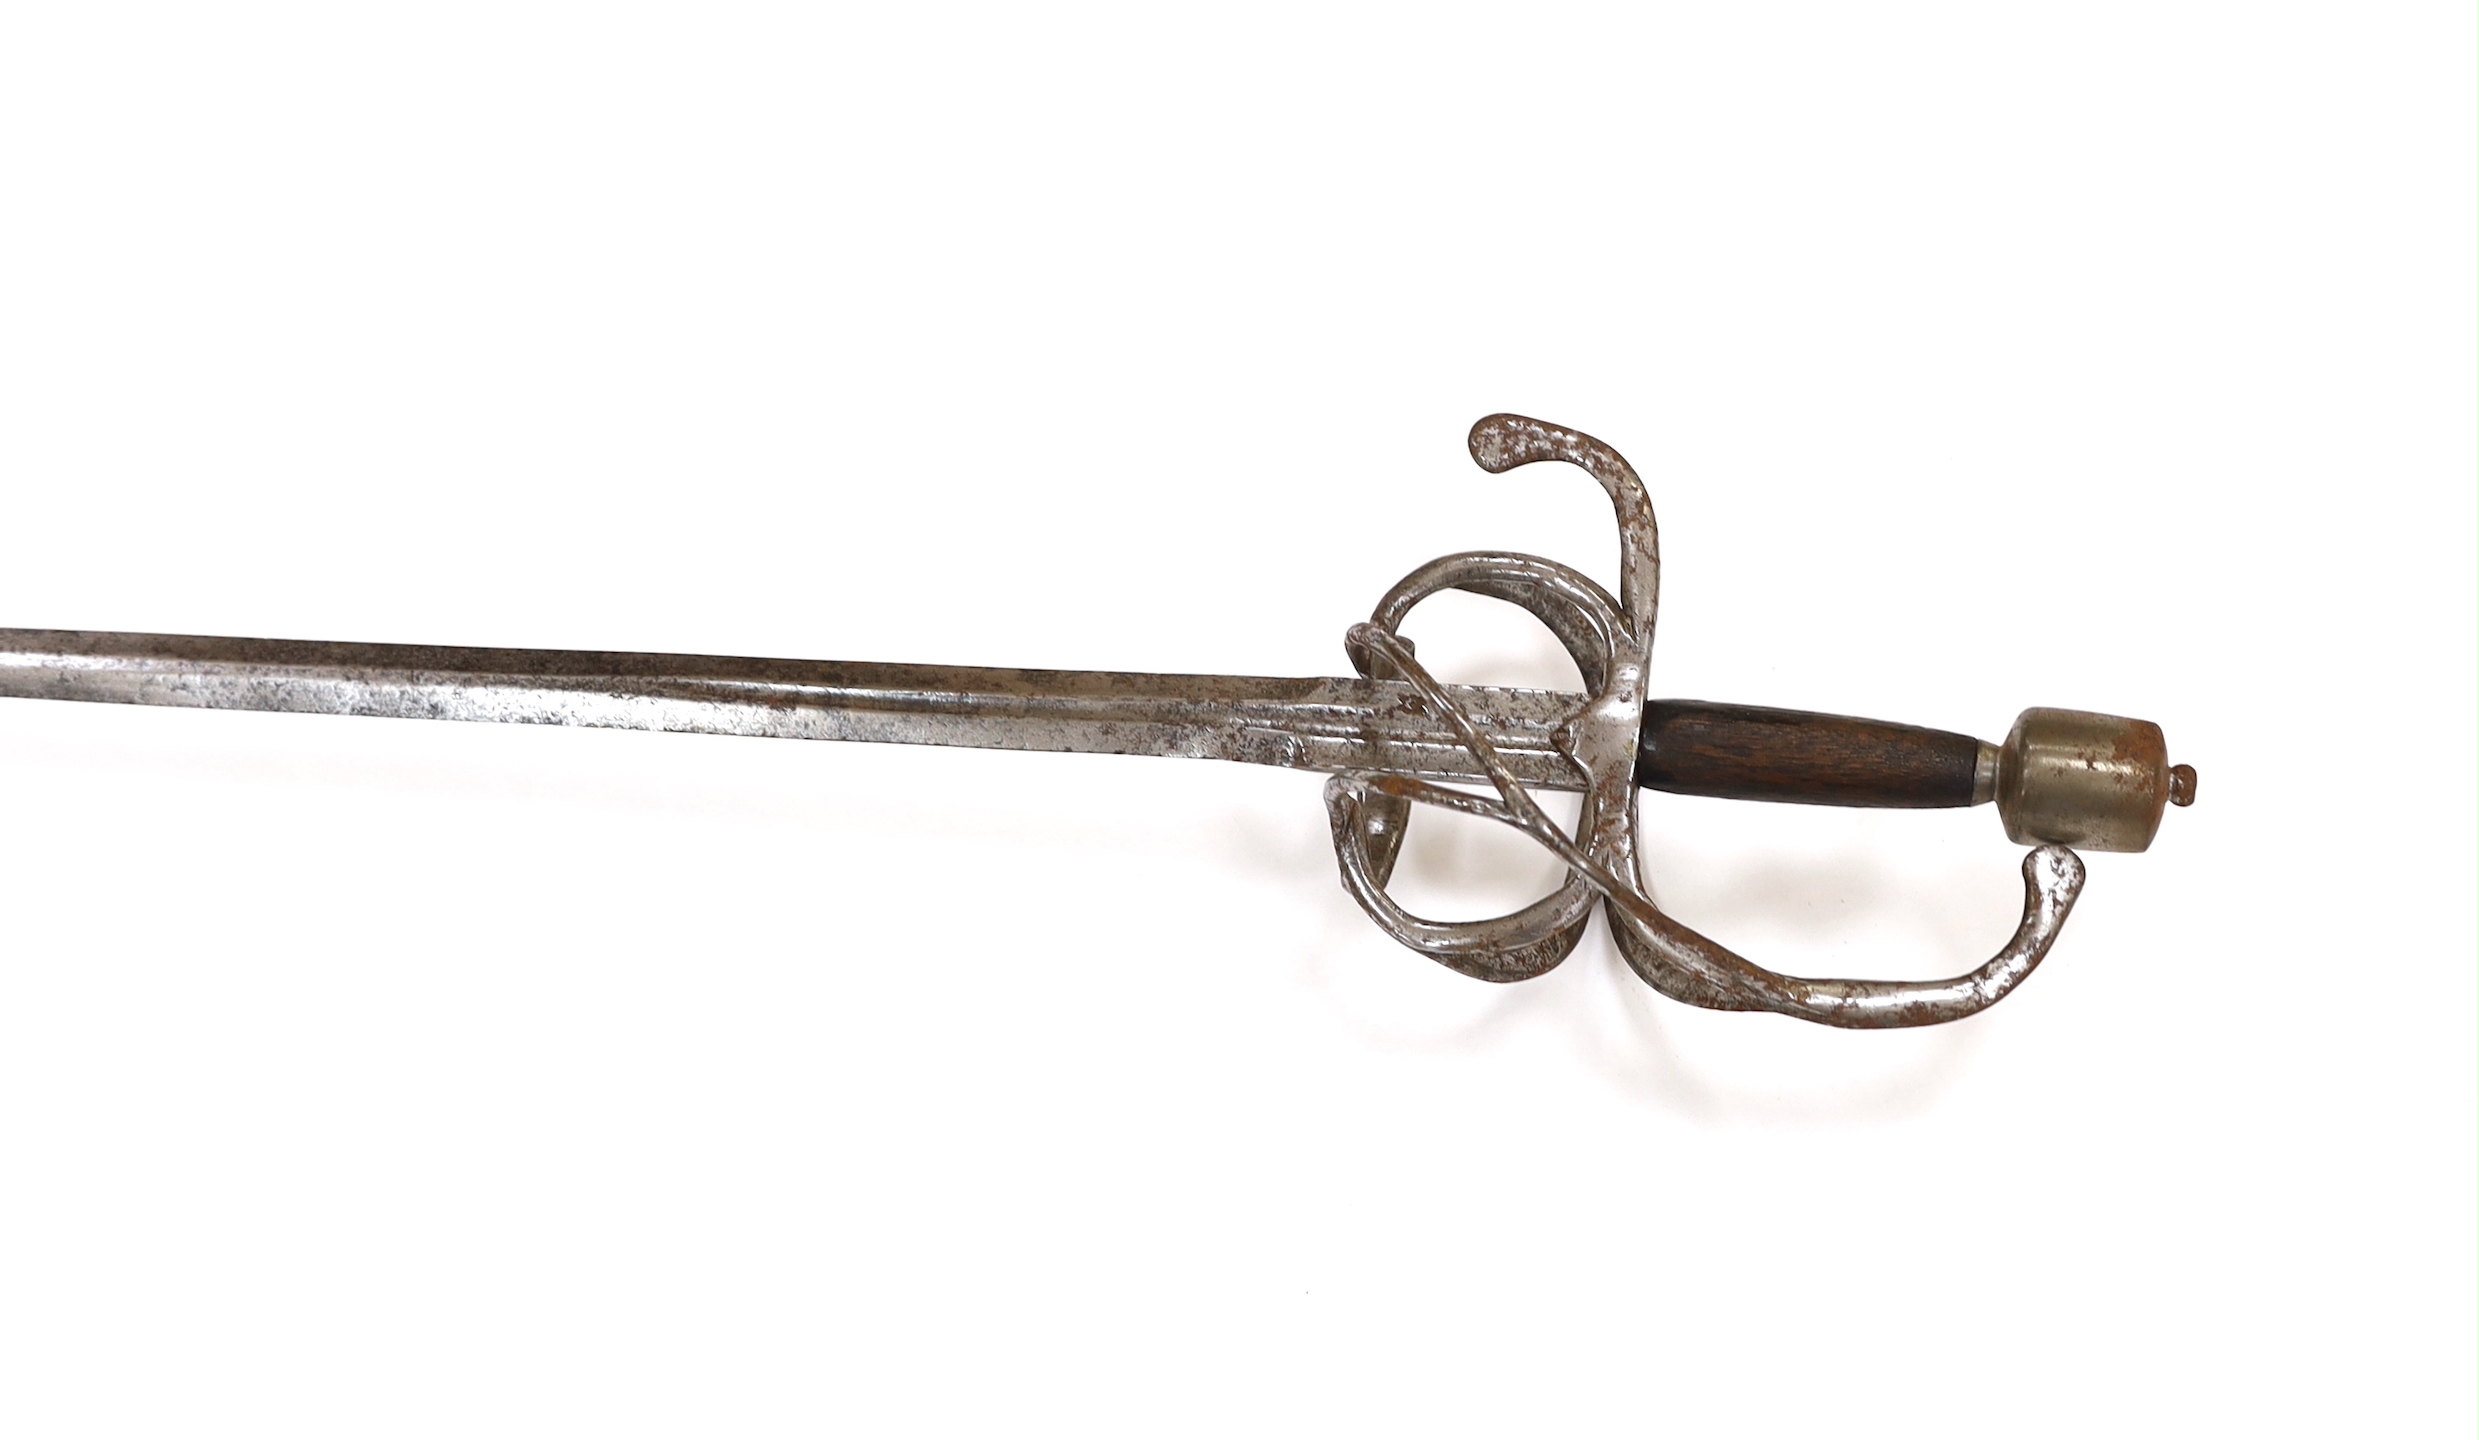 A swept hilt rapier, c.1620, blade fullered at the forte, iron guard of conventional form with later pommel and wooden grip, blade 113cm